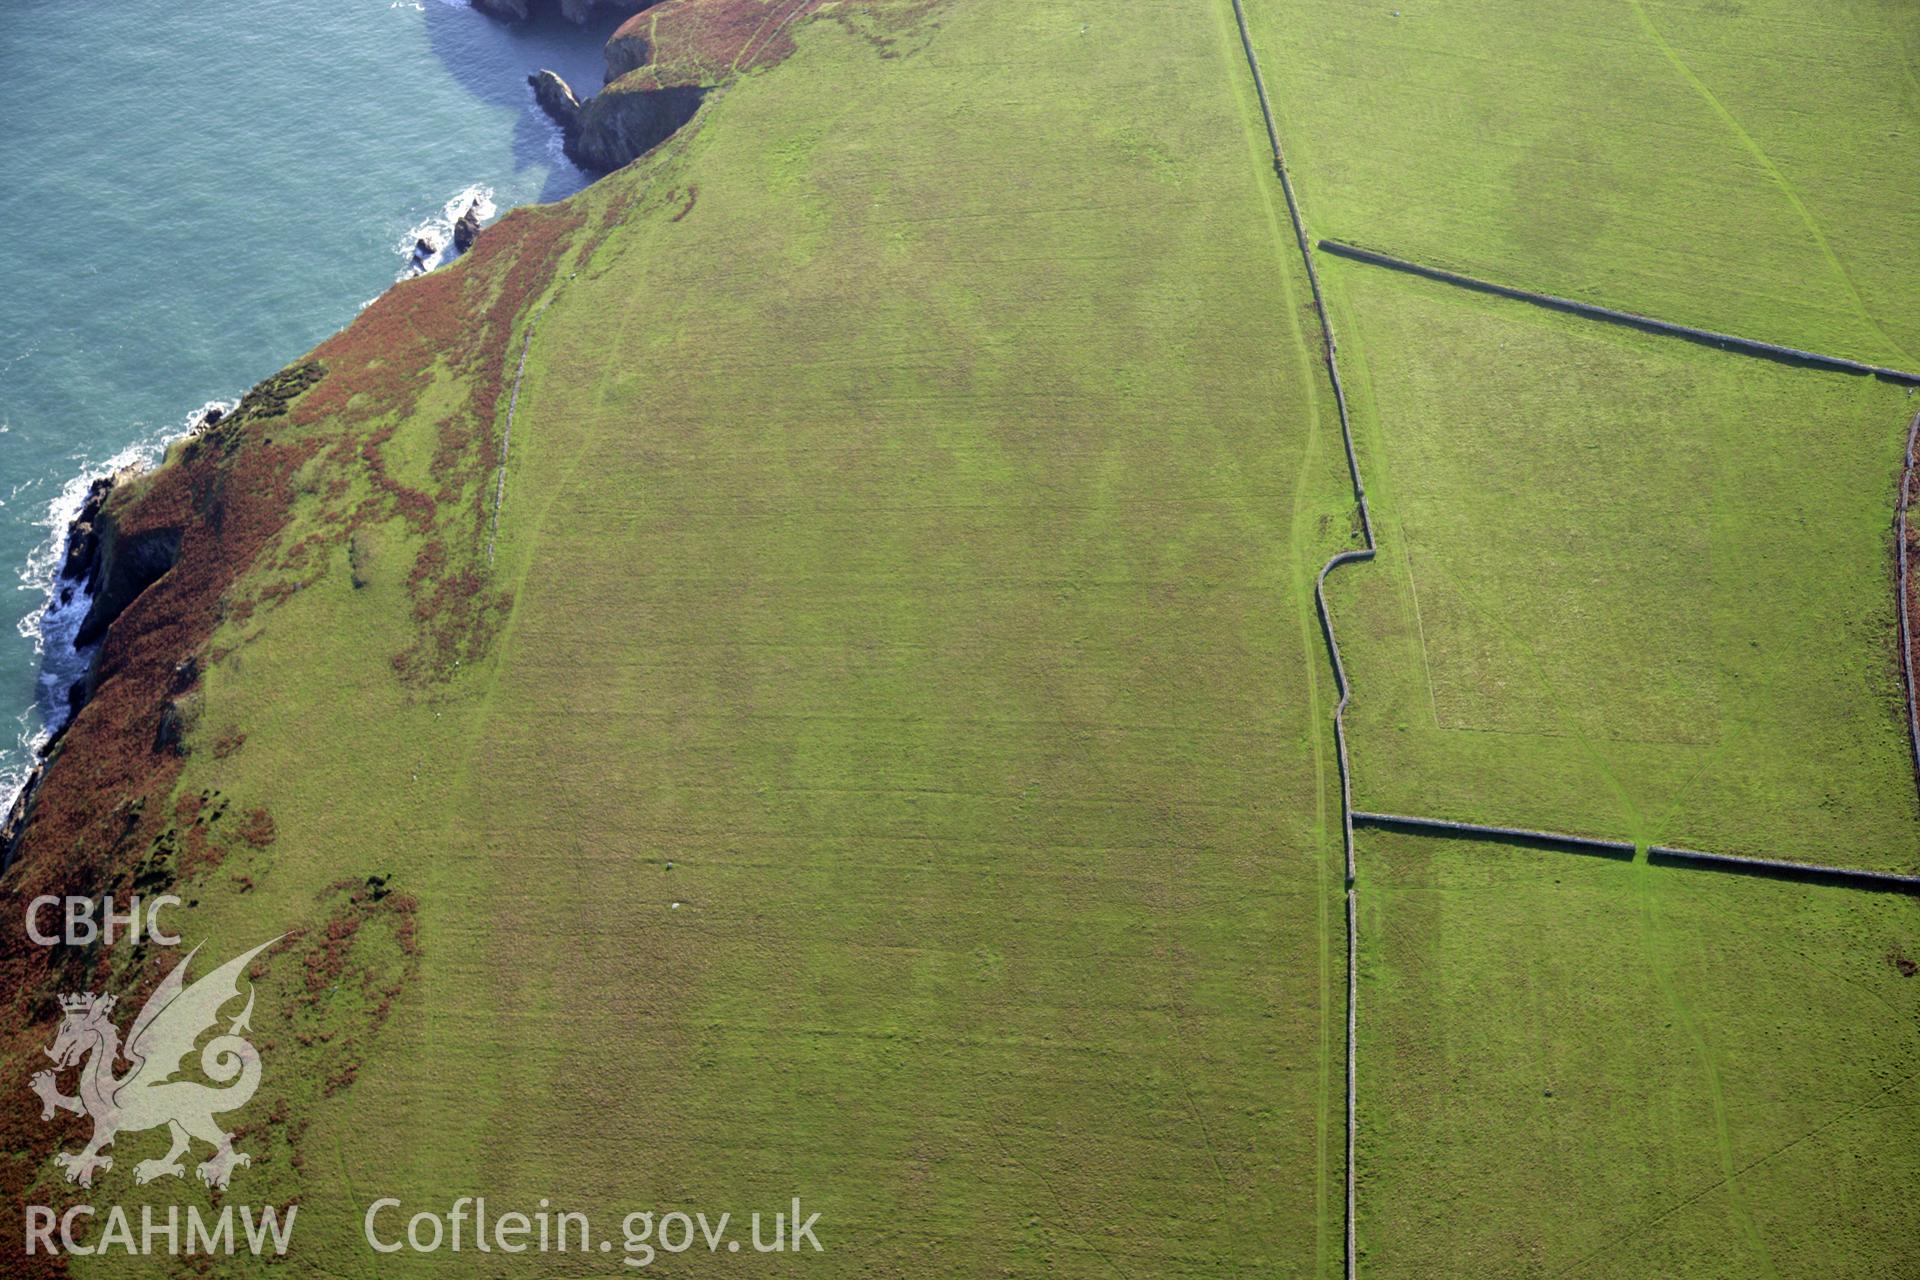 RCAHMW colour oblique photograph of field boundaries, viewed from the north. Taken by O. Davies & T. Driver on 22/11/2013.